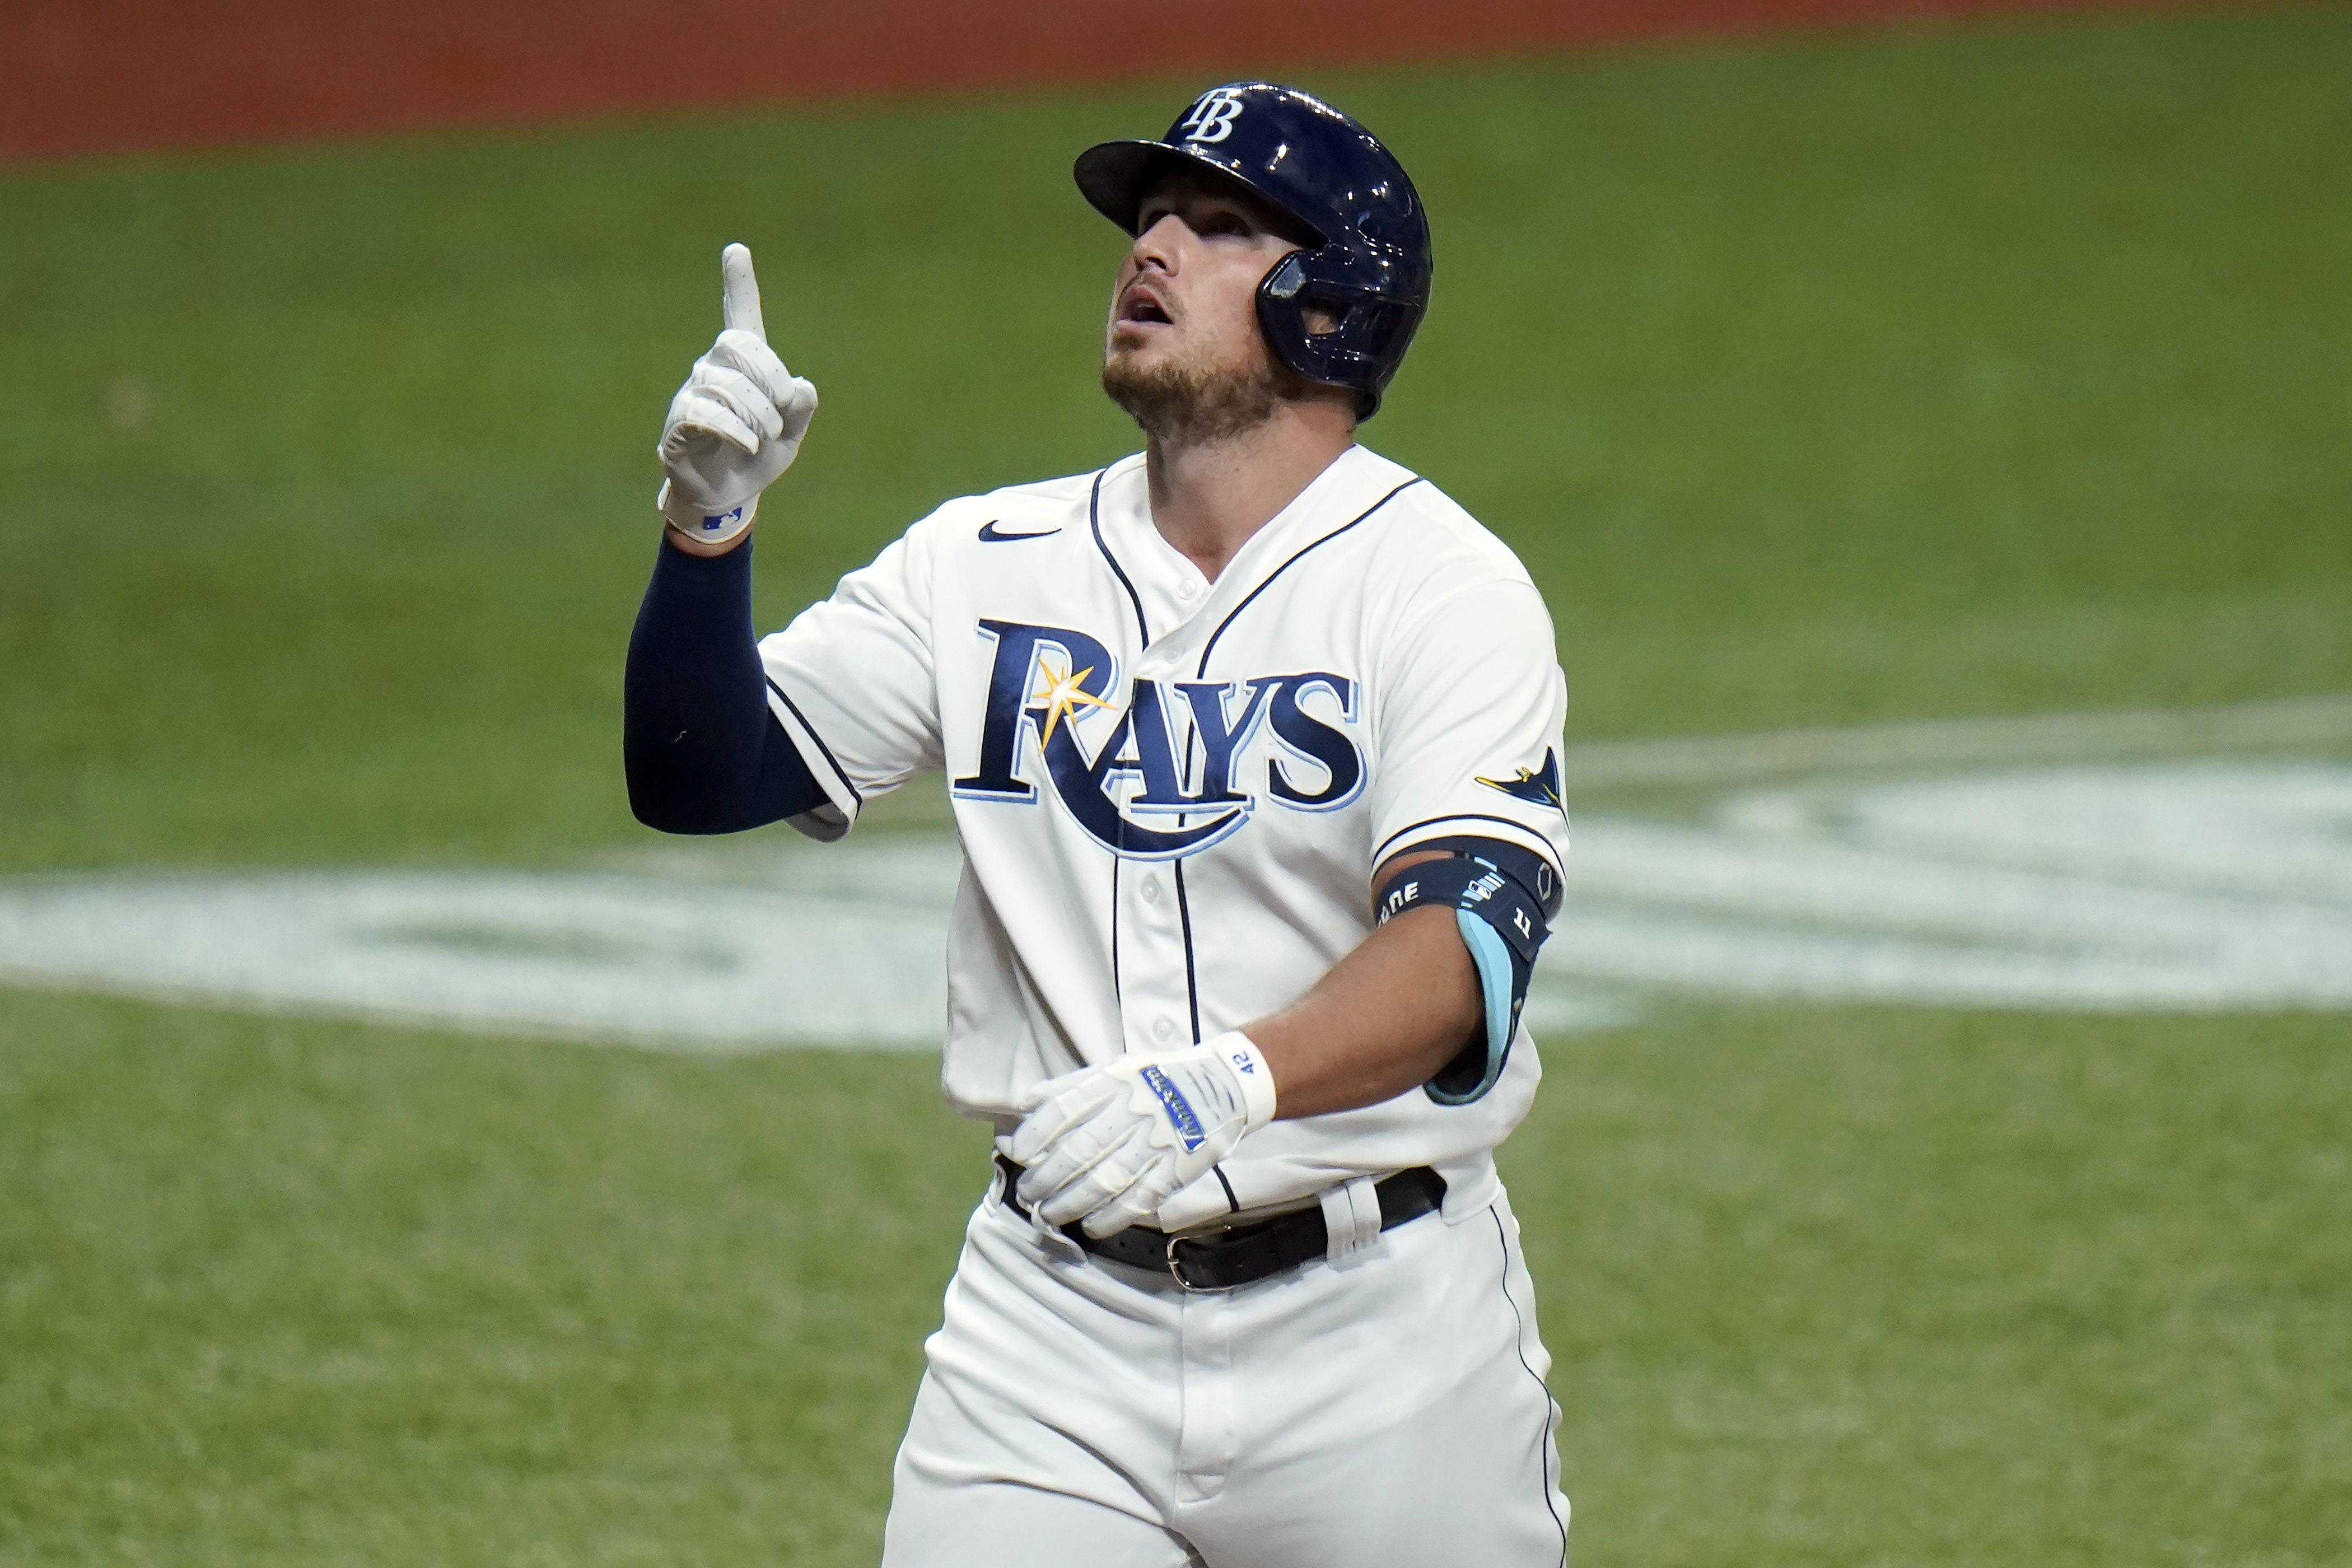 Tampa Bay Rays: Hunter Refrow recognizes Hunter Renfroe